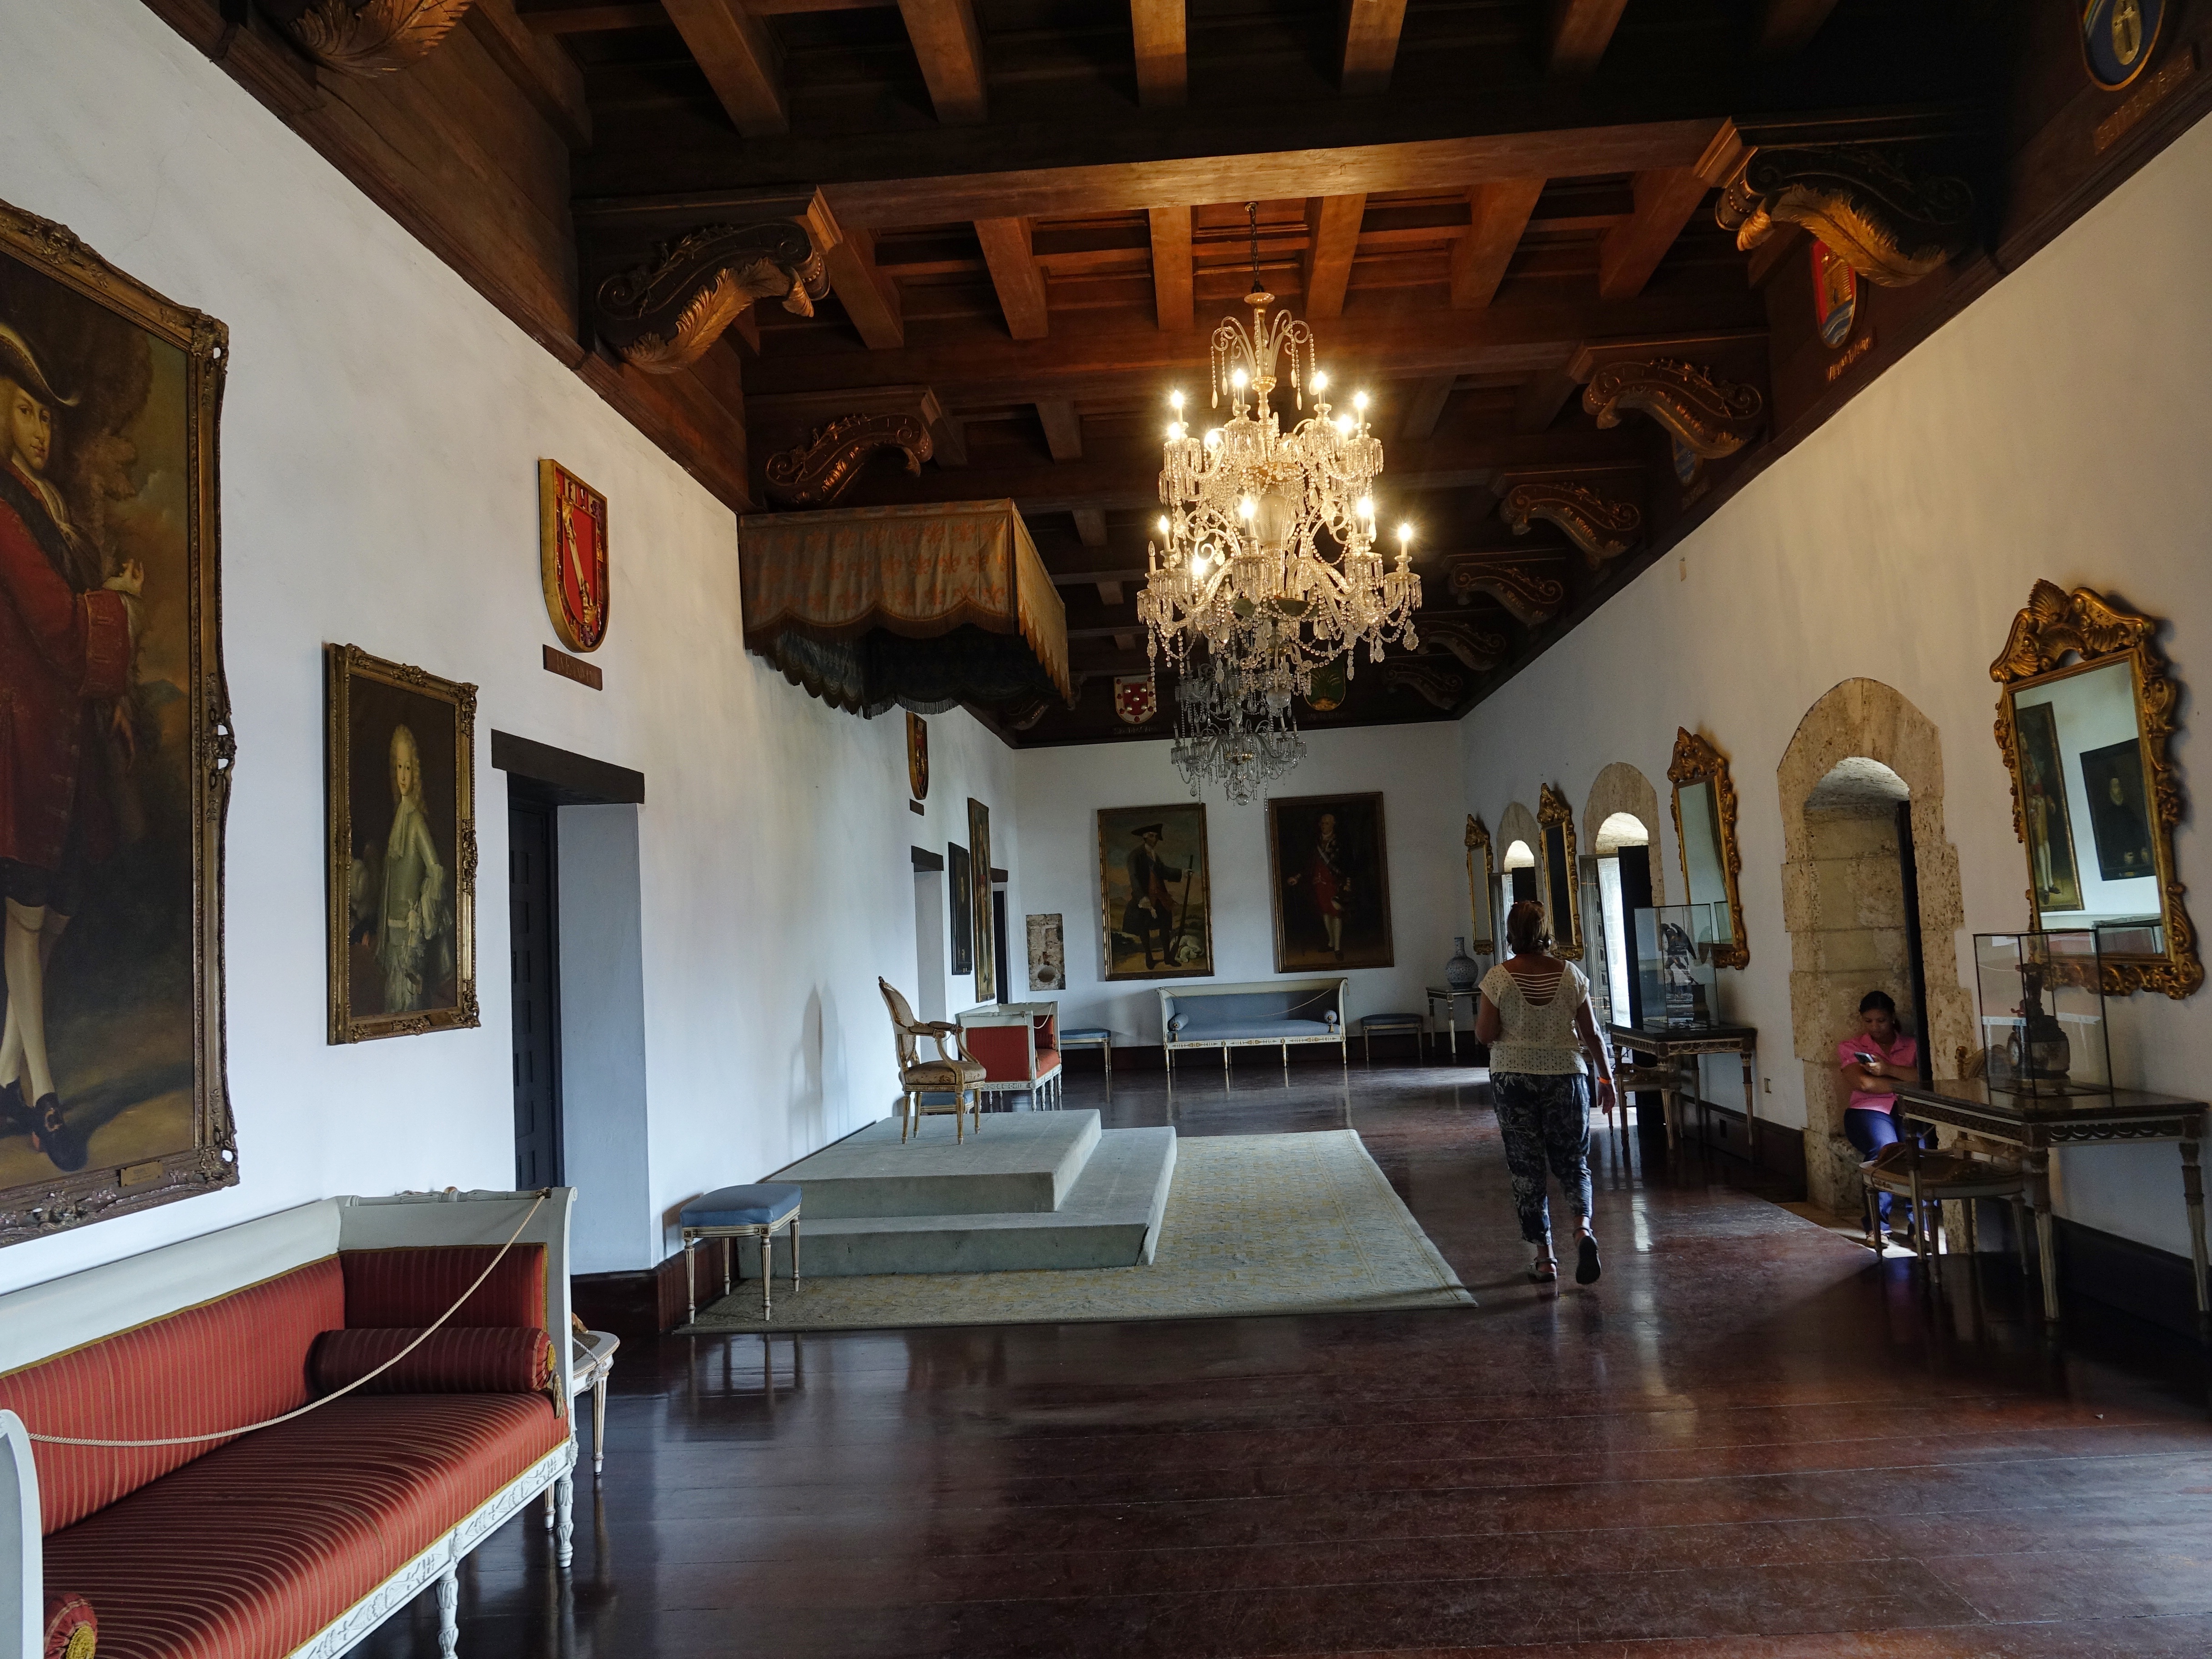 Receiving room of the Royals